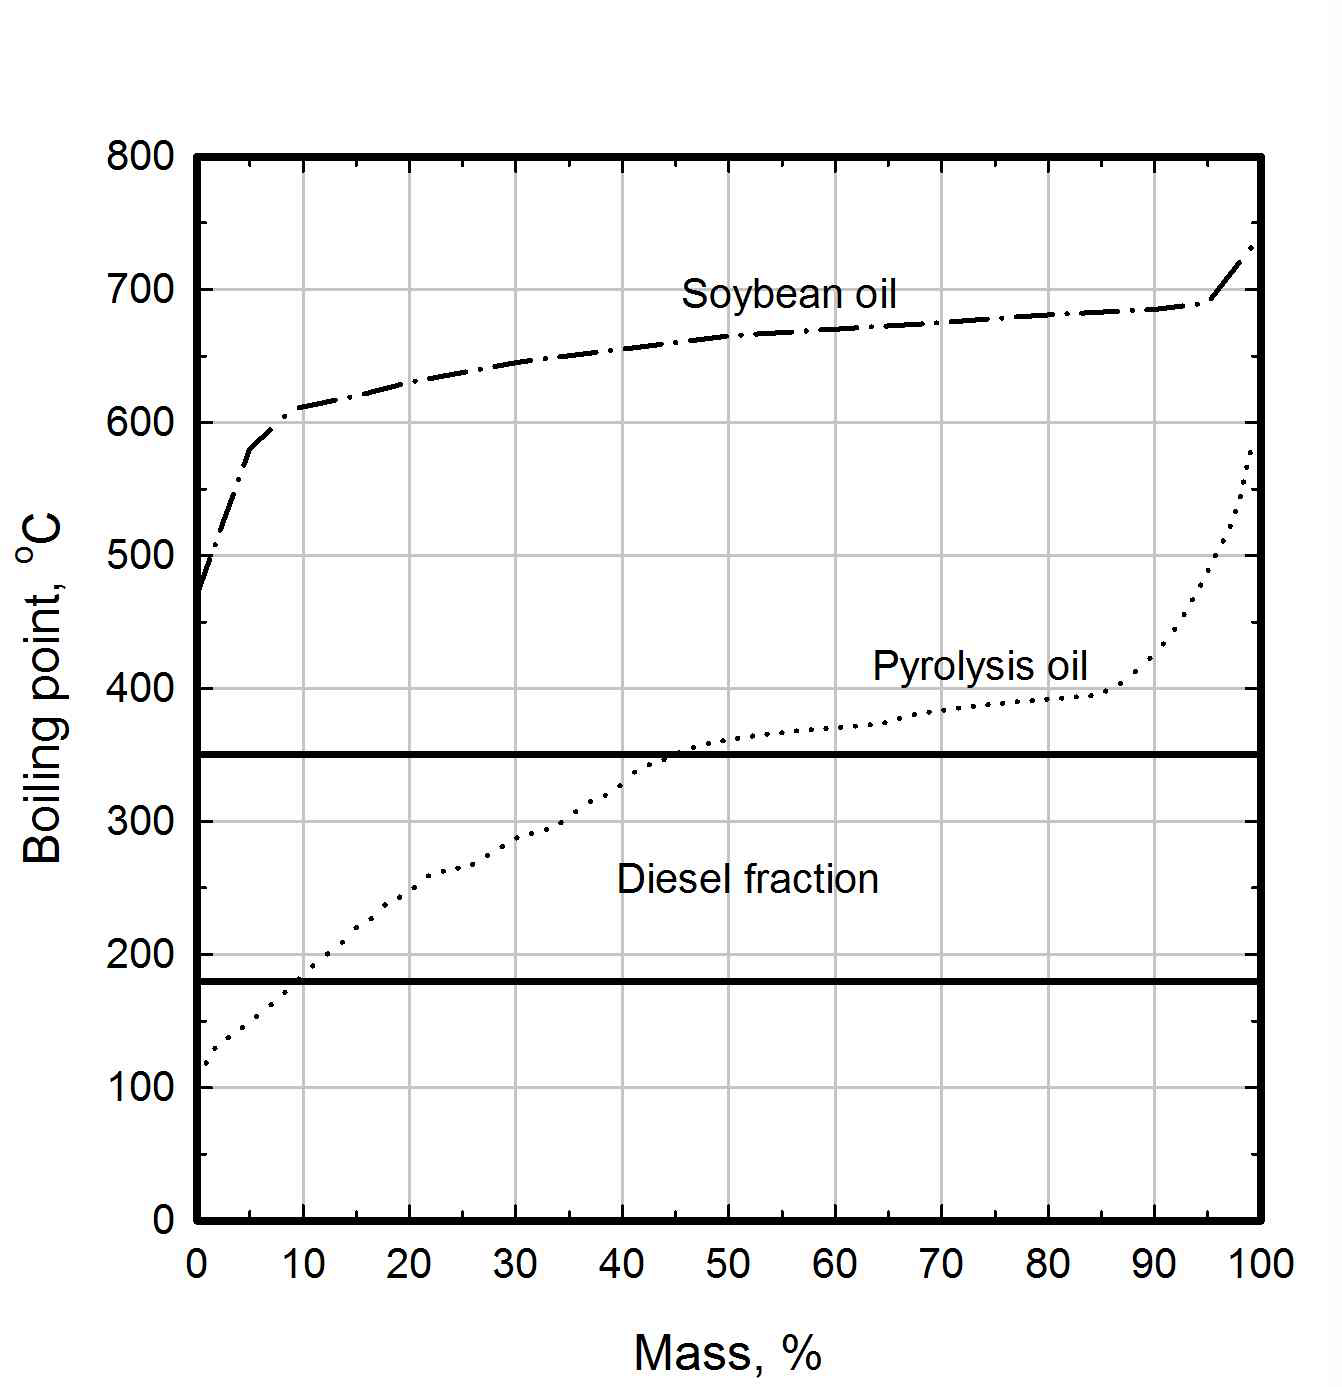 Boiling point distribution of the pyrolysis oil (Chlorella B) and soybean oil